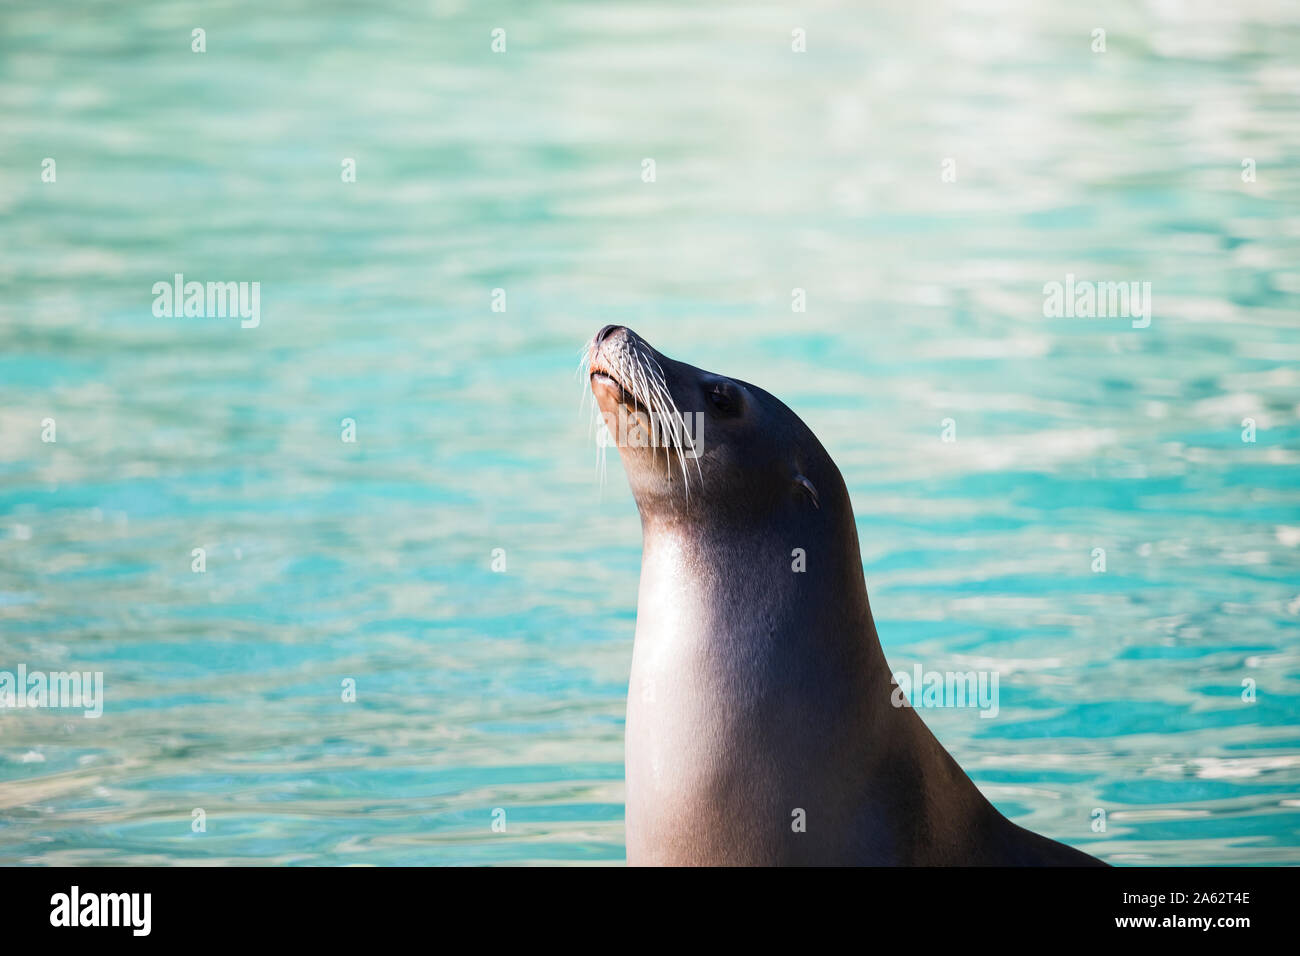 Californian sea lion focuses on something in the distance out of the cameras frame. Stock Photo